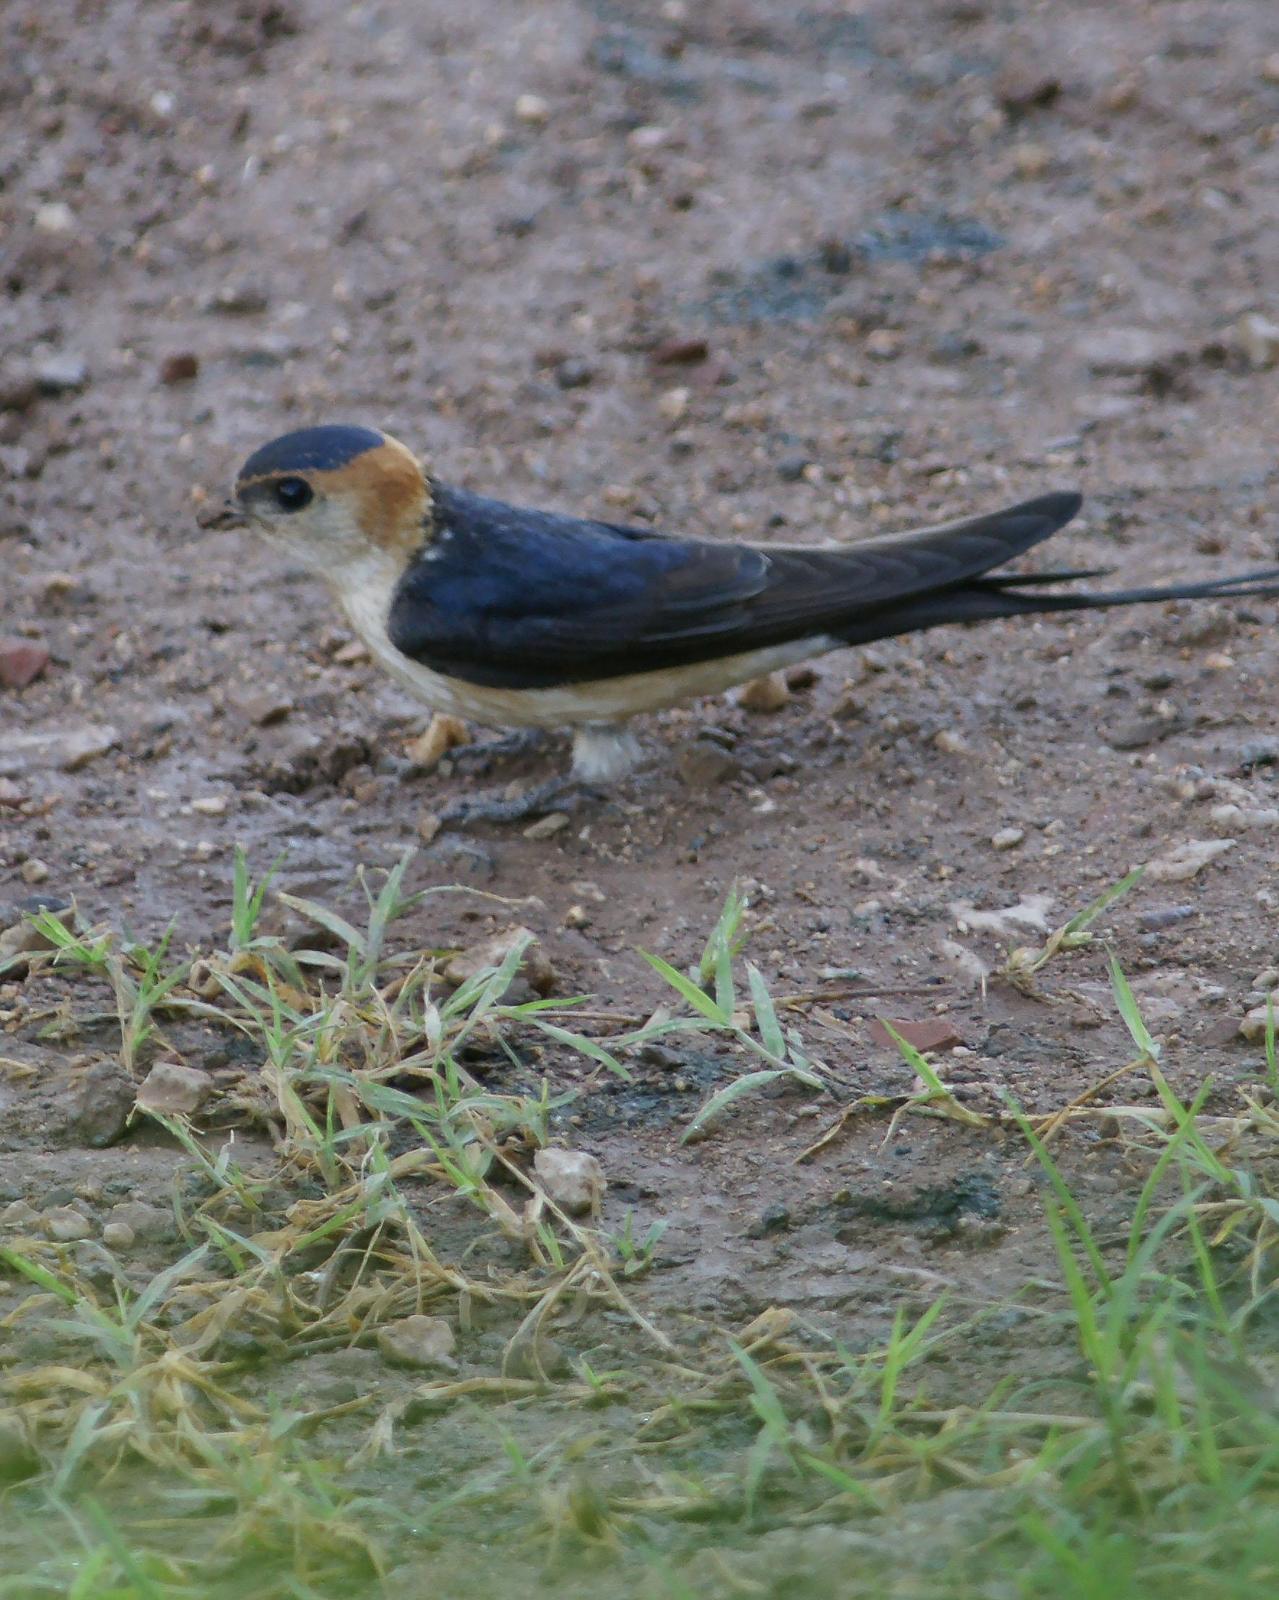 Red-rumped Swallow Photo by Steve Percival